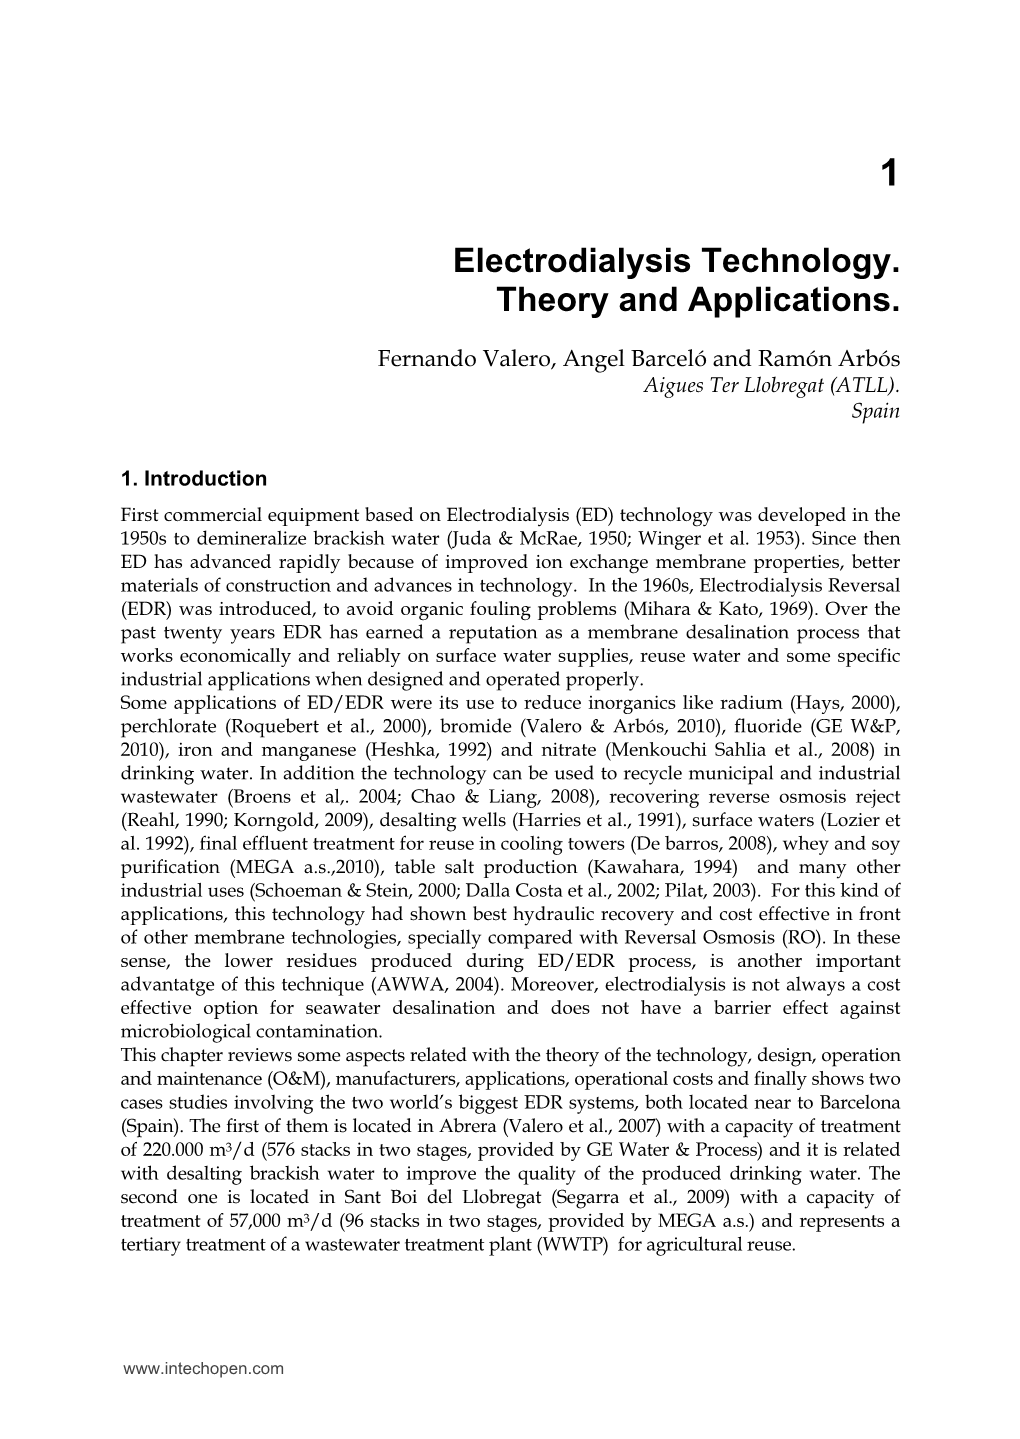 Electrodialysis Technology. Theory and Applications